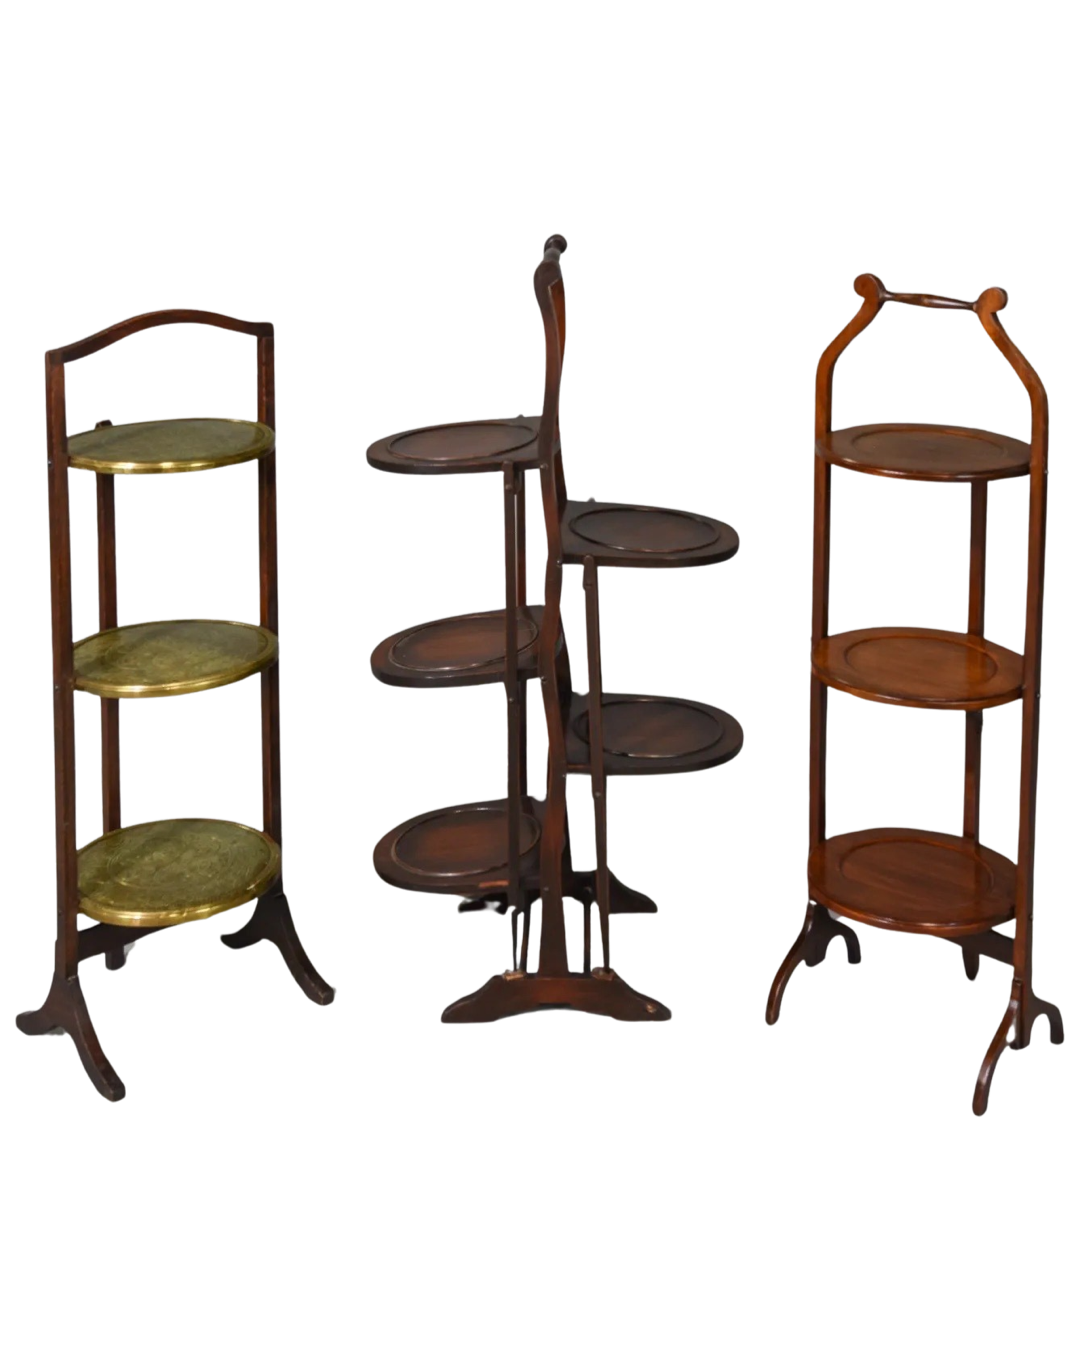 Antique English Pastry Stands